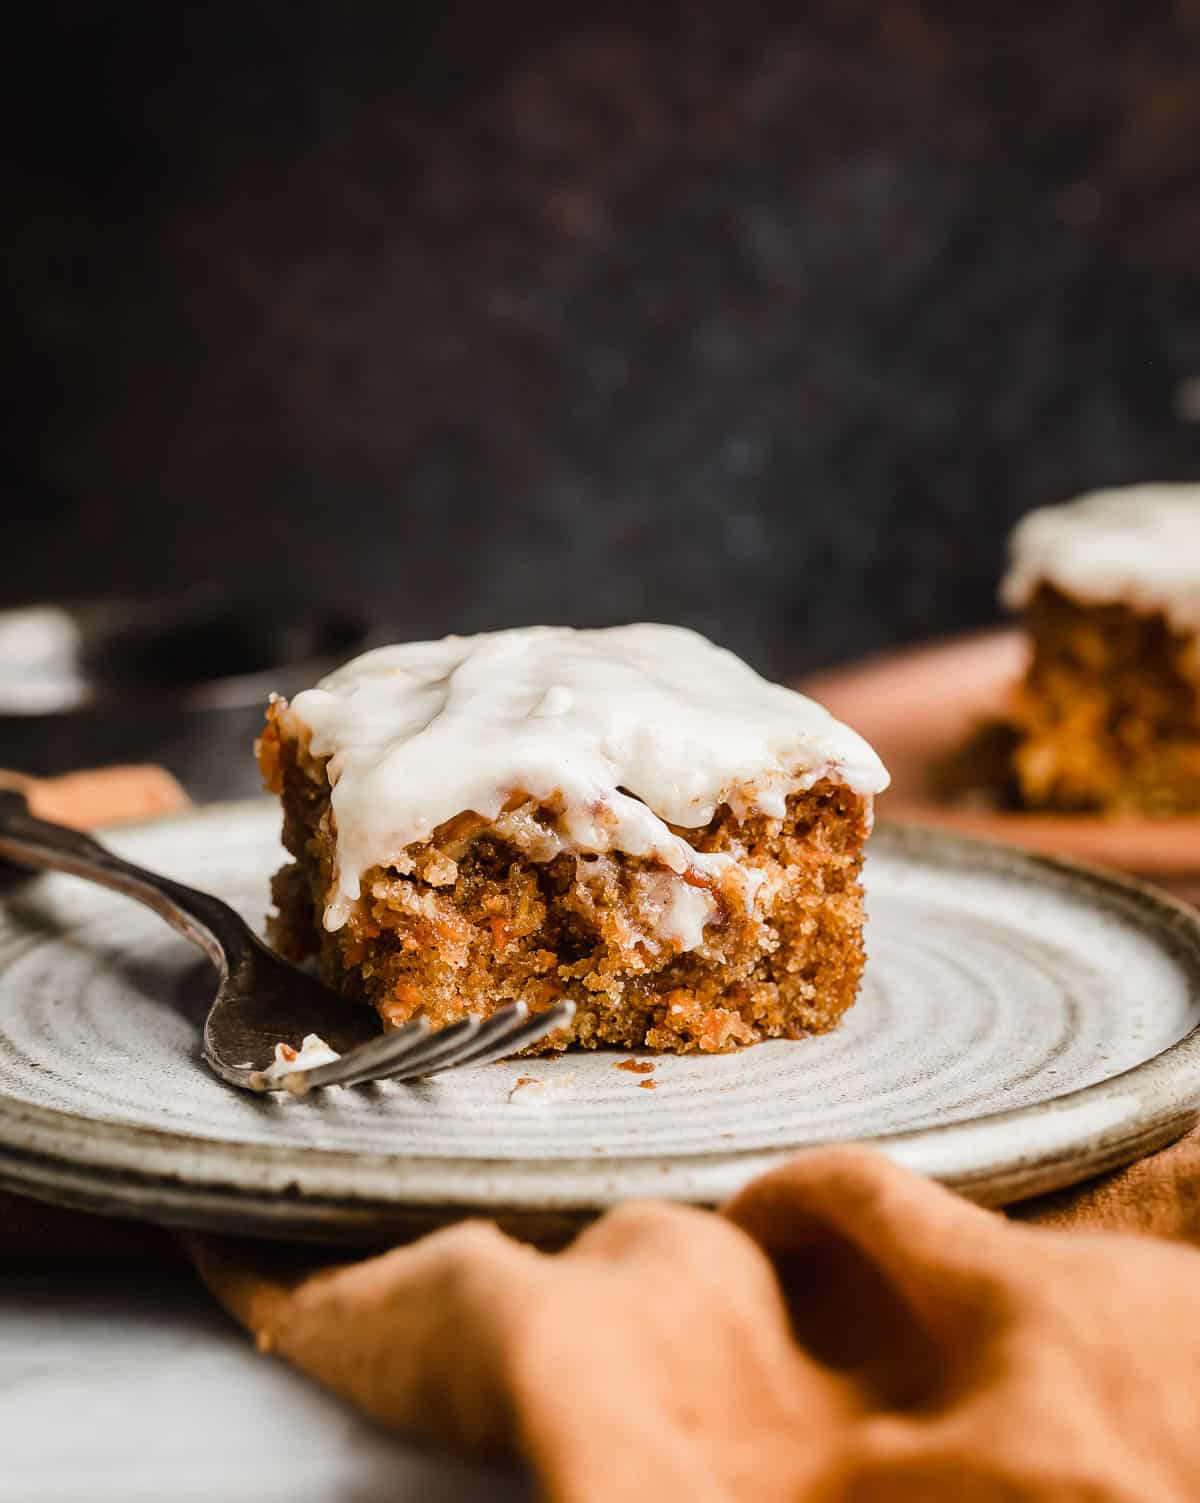 A square of Carrot Coffee Cake topped with a pecan streusel and cream cheese glaze/frosting on a white plate.